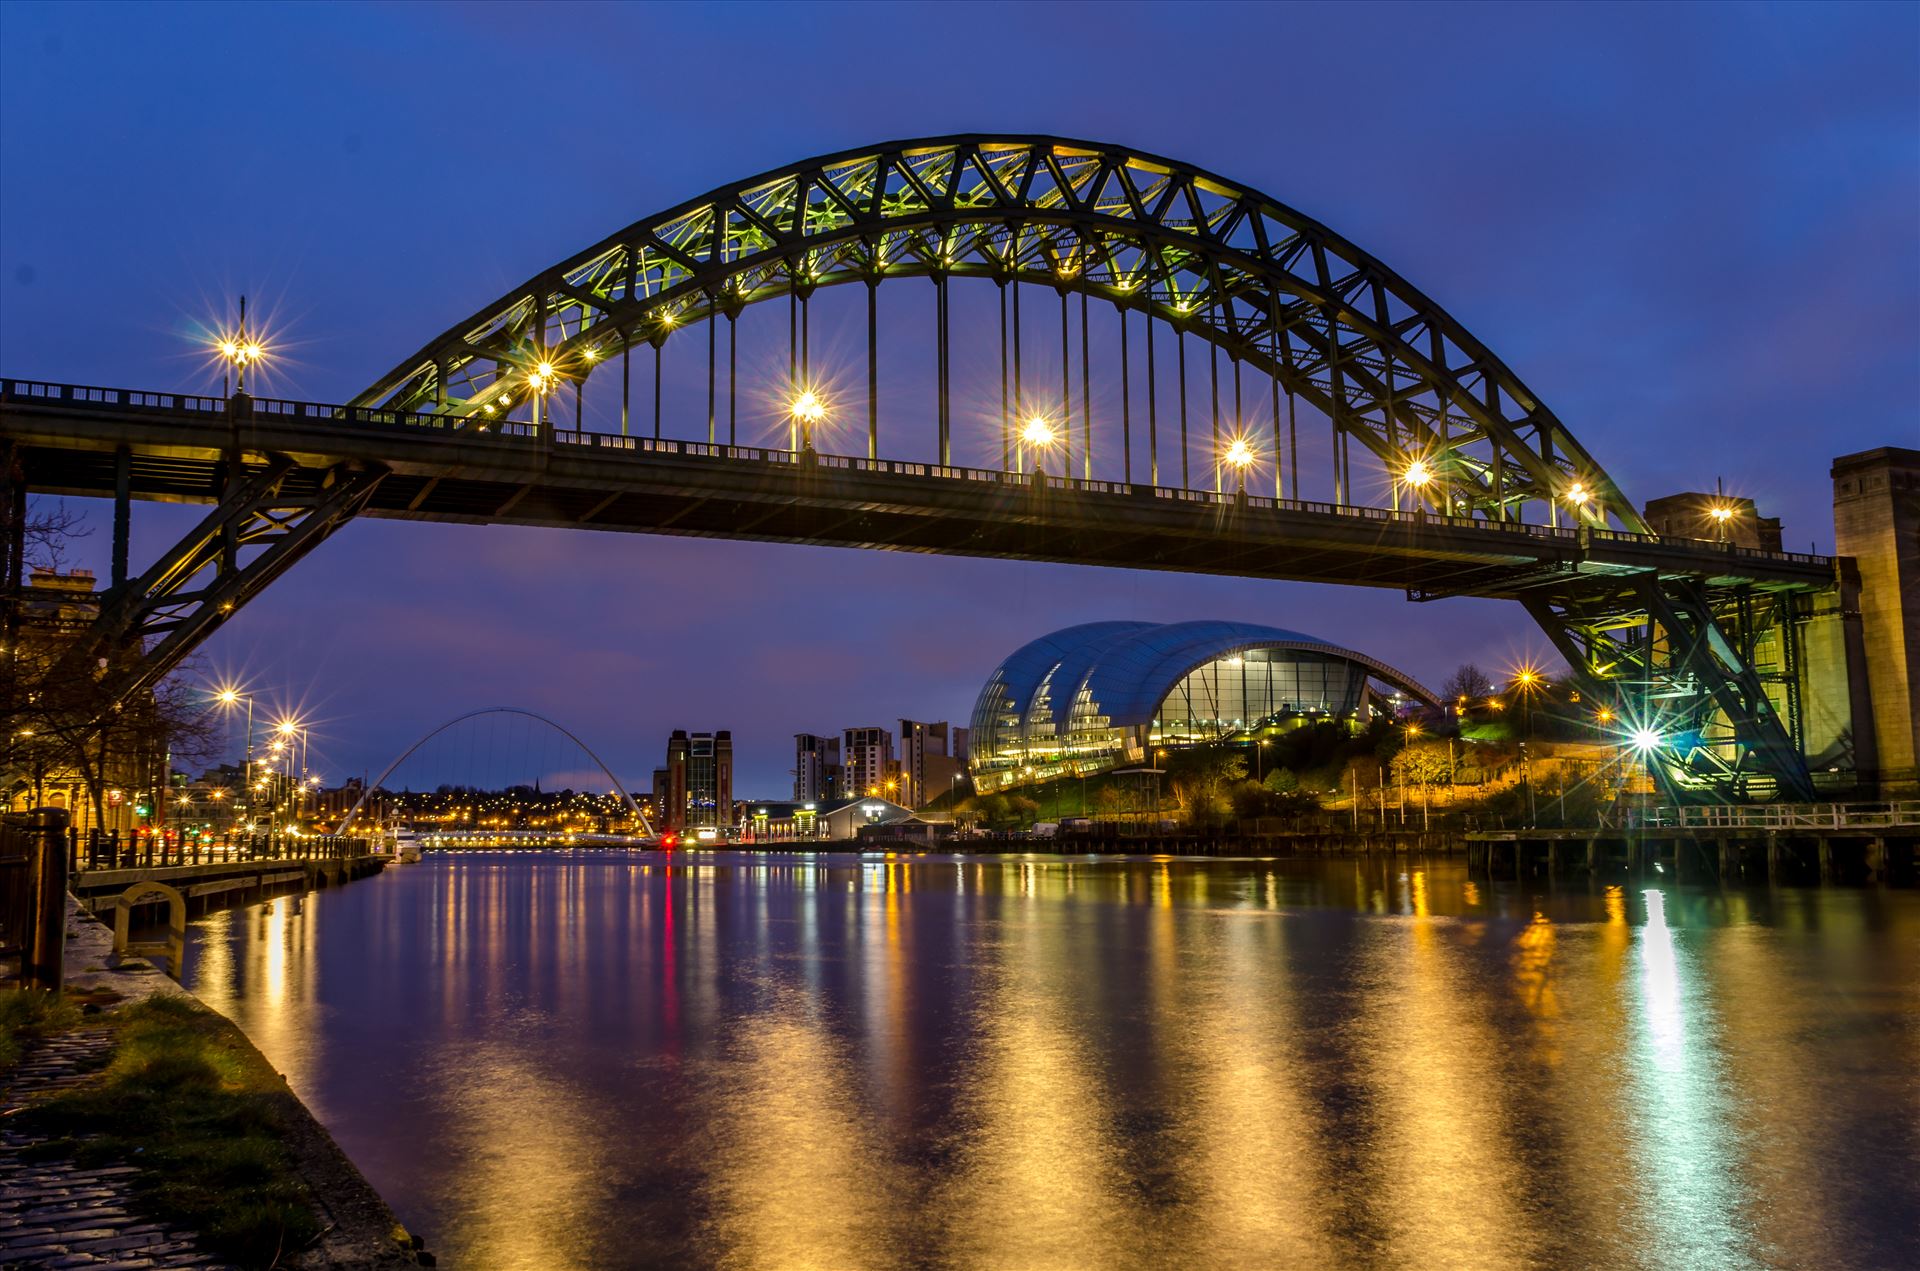 The Tyne at night -  by philreay